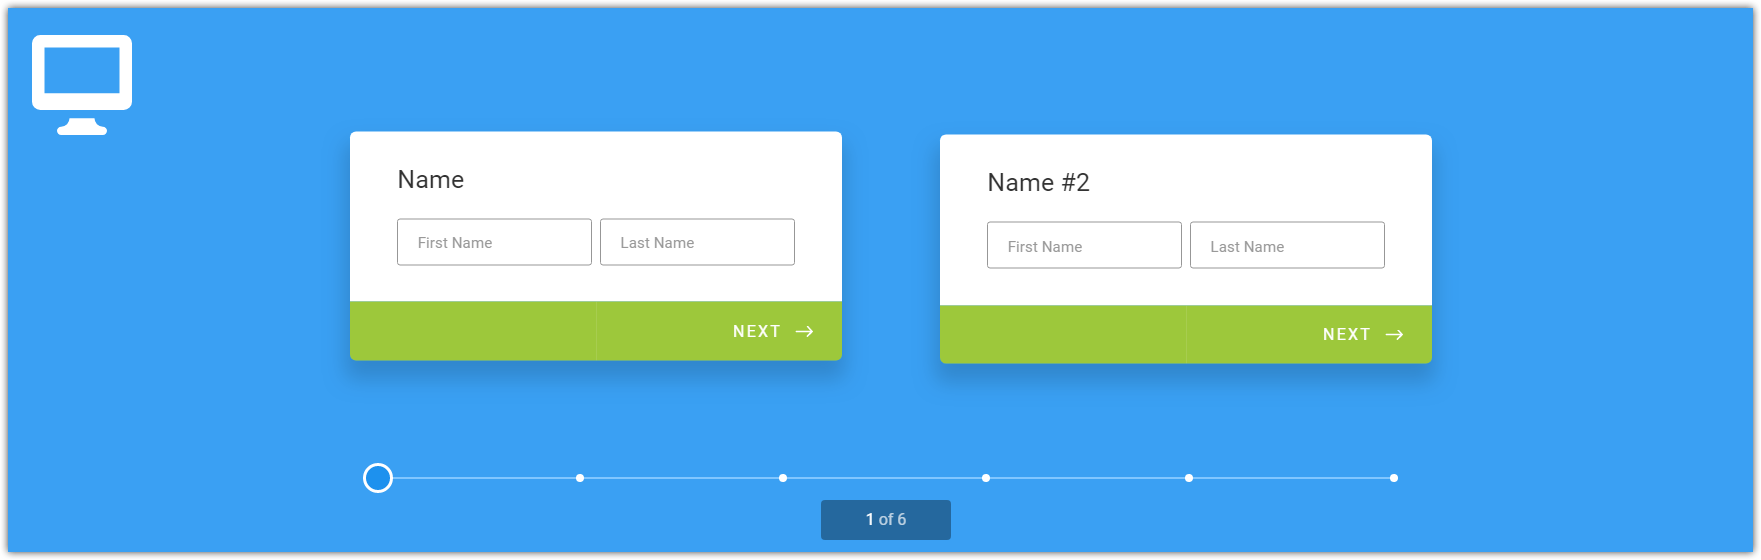 JotForm Cards: Is there an option to place cards side by side on the same screen? Image 1 Screenshot 20